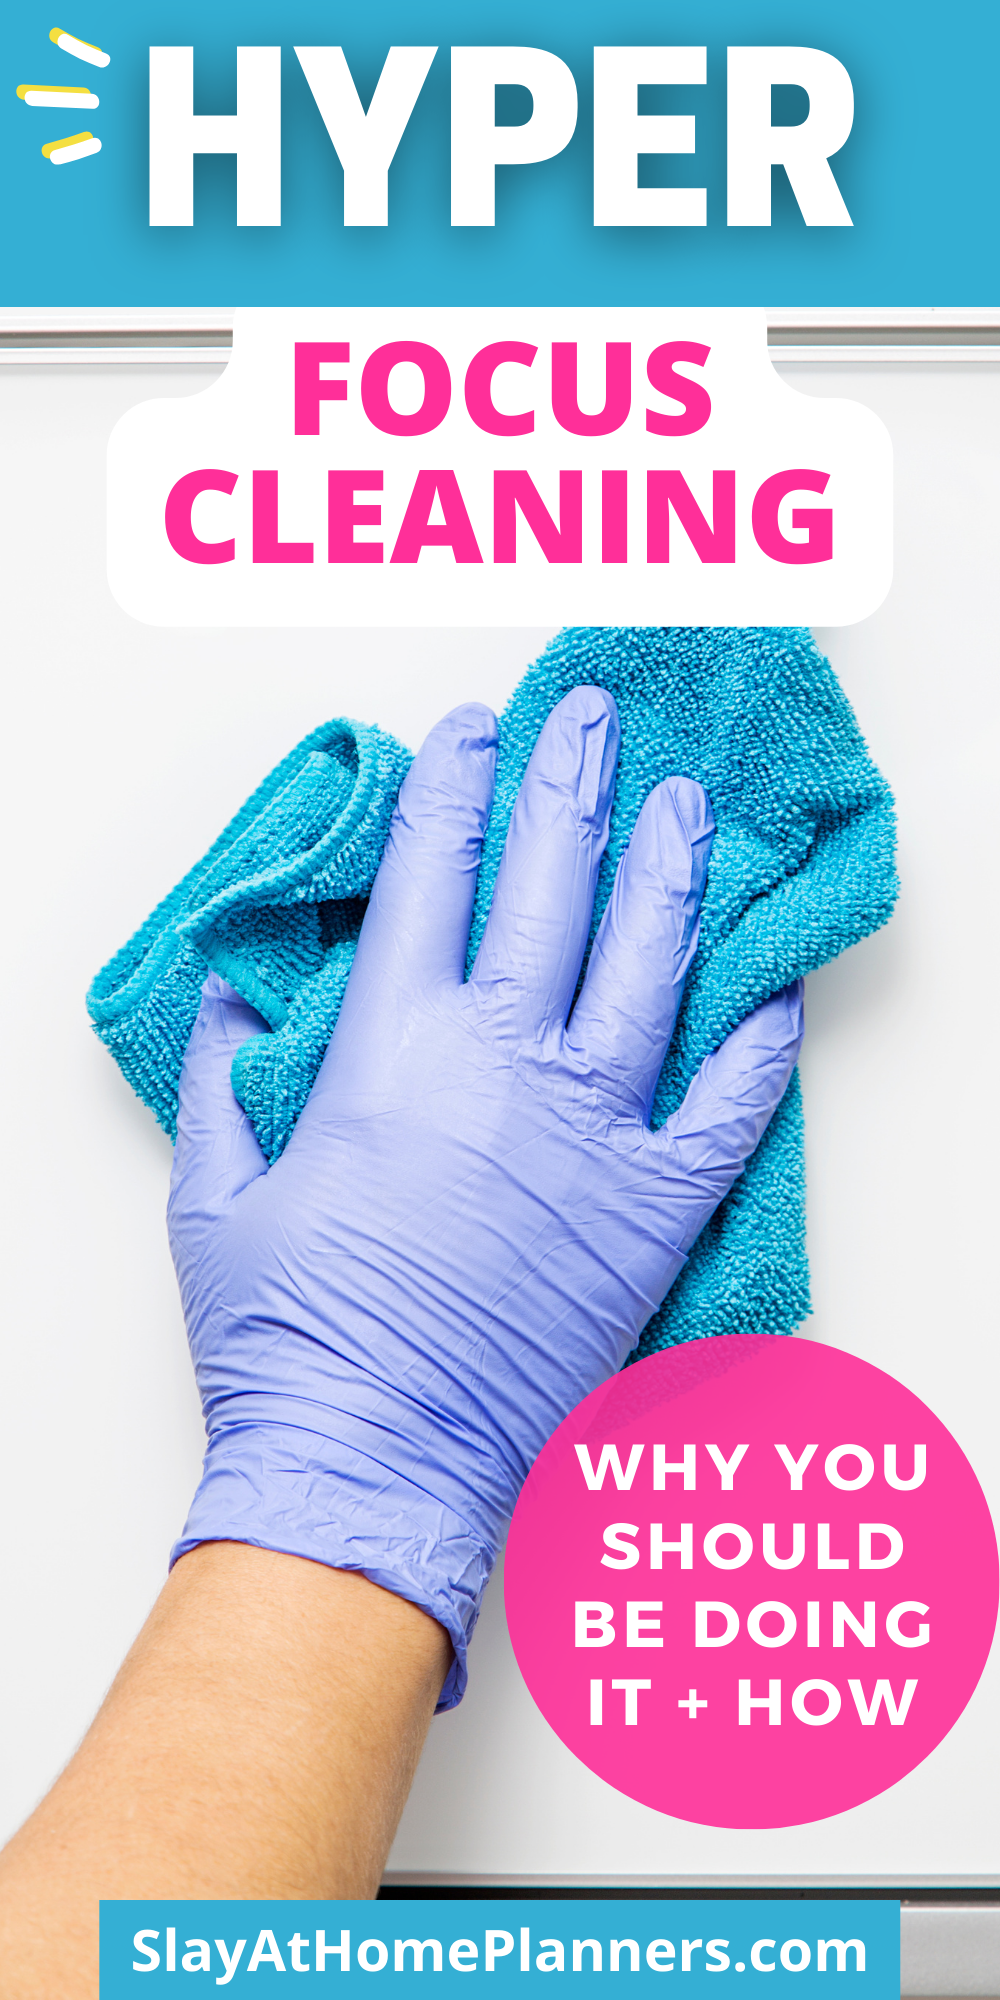 HYPERFOCUS CLEANING PIN